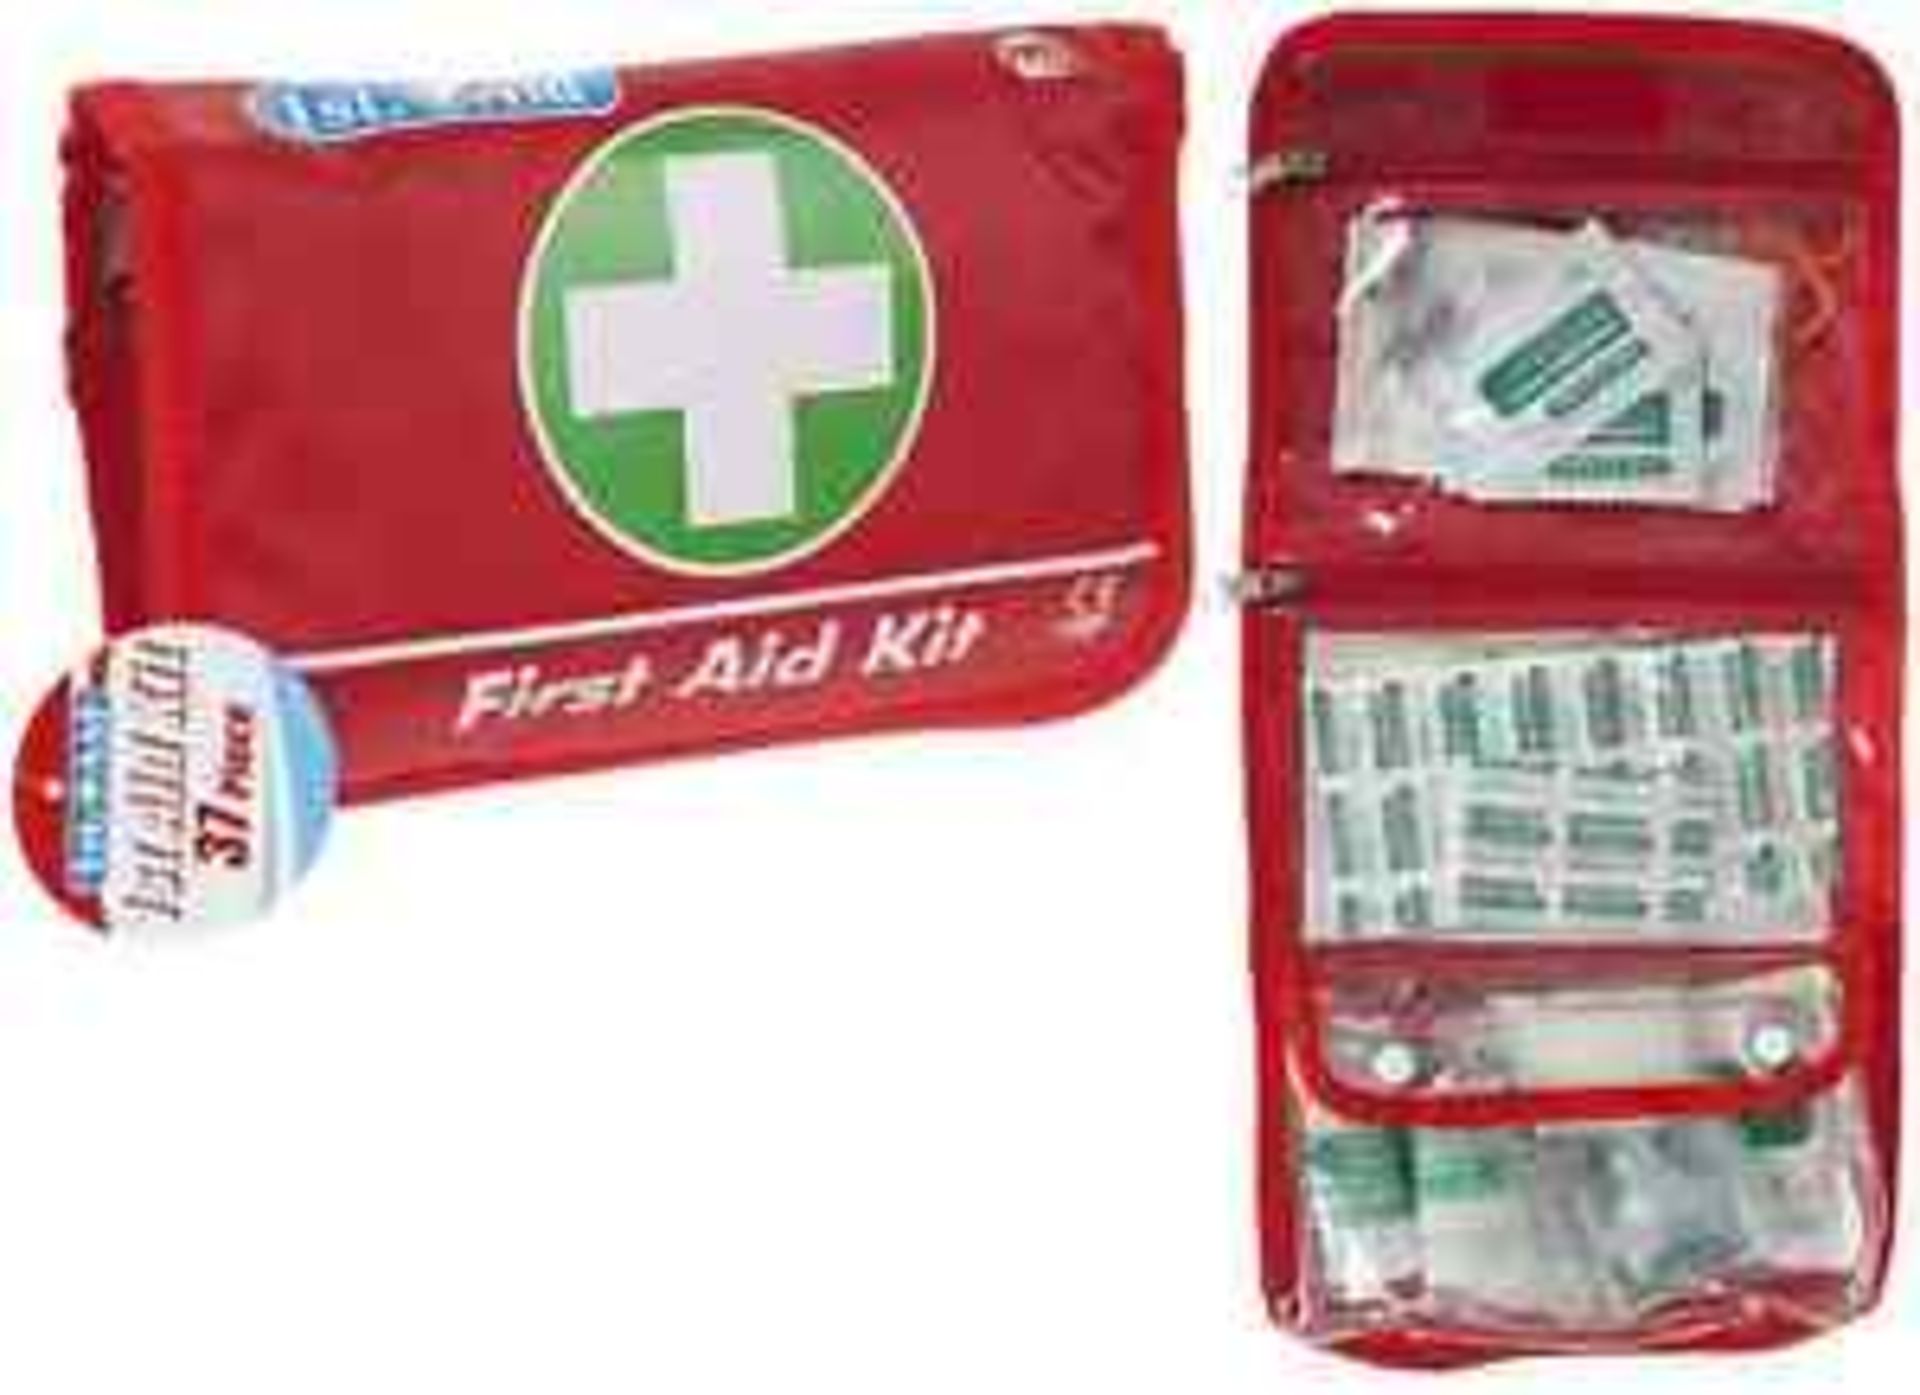 V *TRADE QTY* Brand New 37 Piece First Aid Kit In Pouch X 5 YOUR BID PRICE TO BE MULTIPLIED BY FIVE